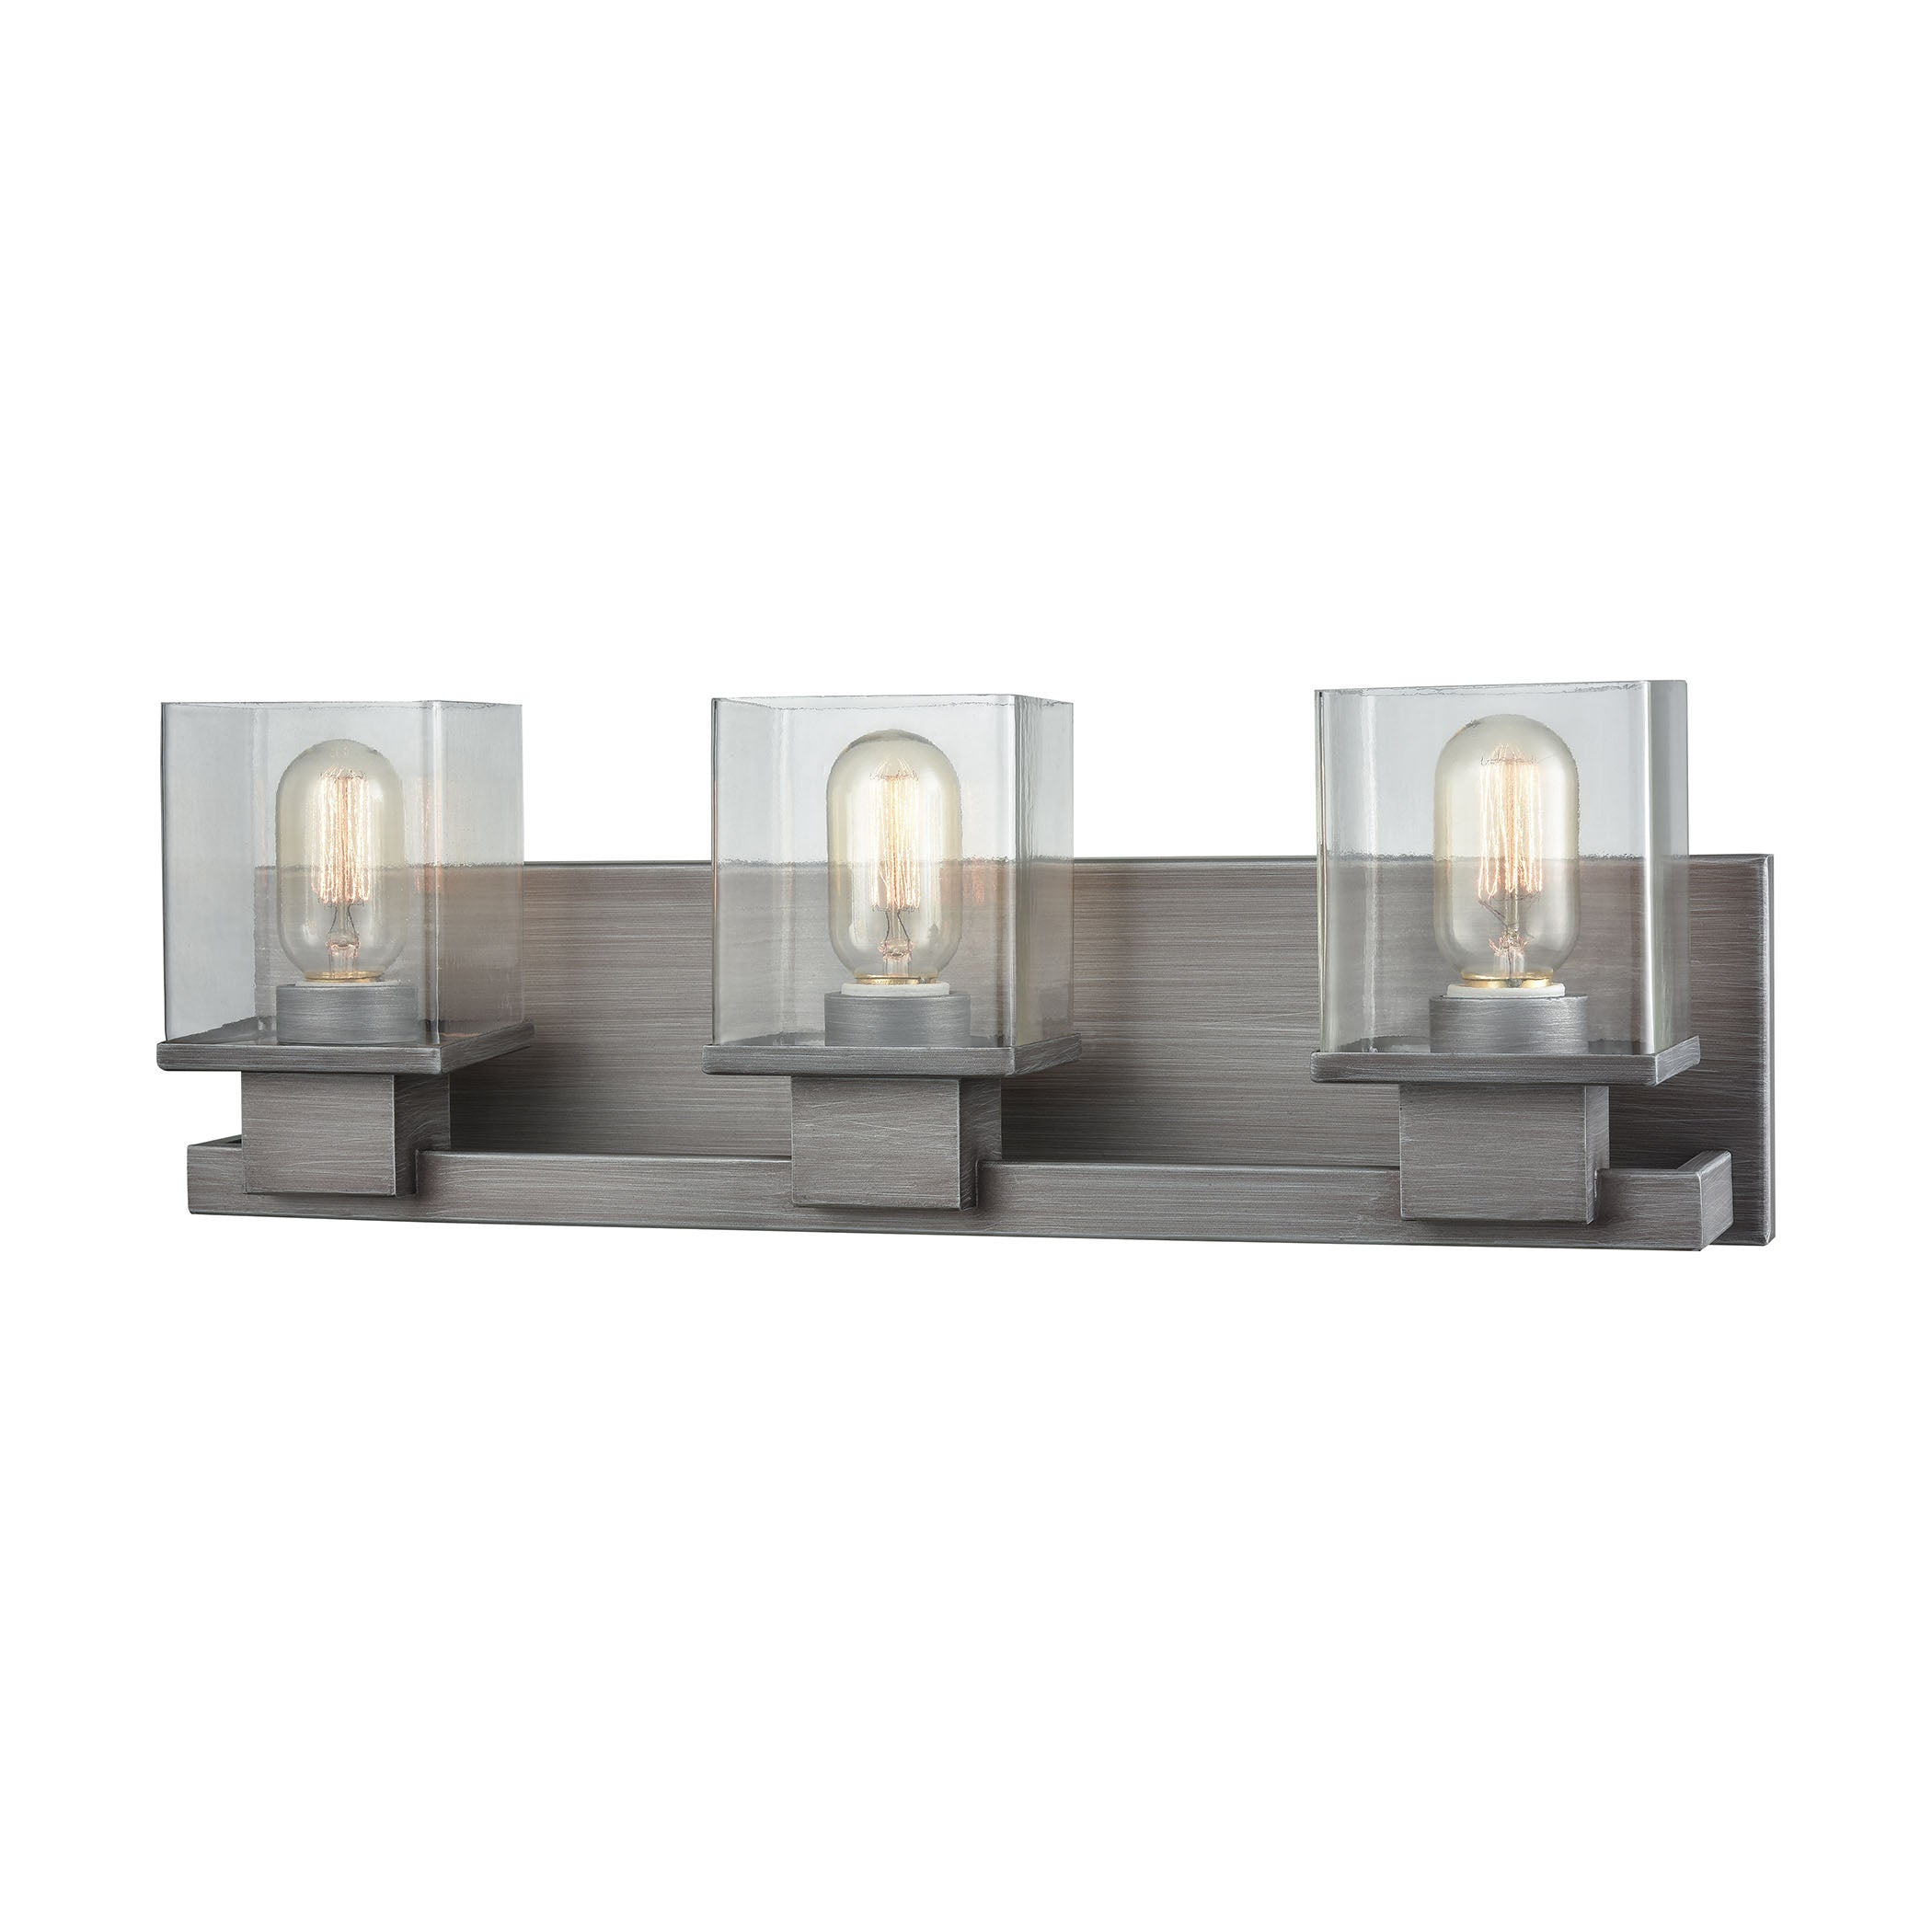 ELK Lighting 11942/3 Hotelier 3-Light Vanity Sconce in Weathered Zinc with Clear Glass